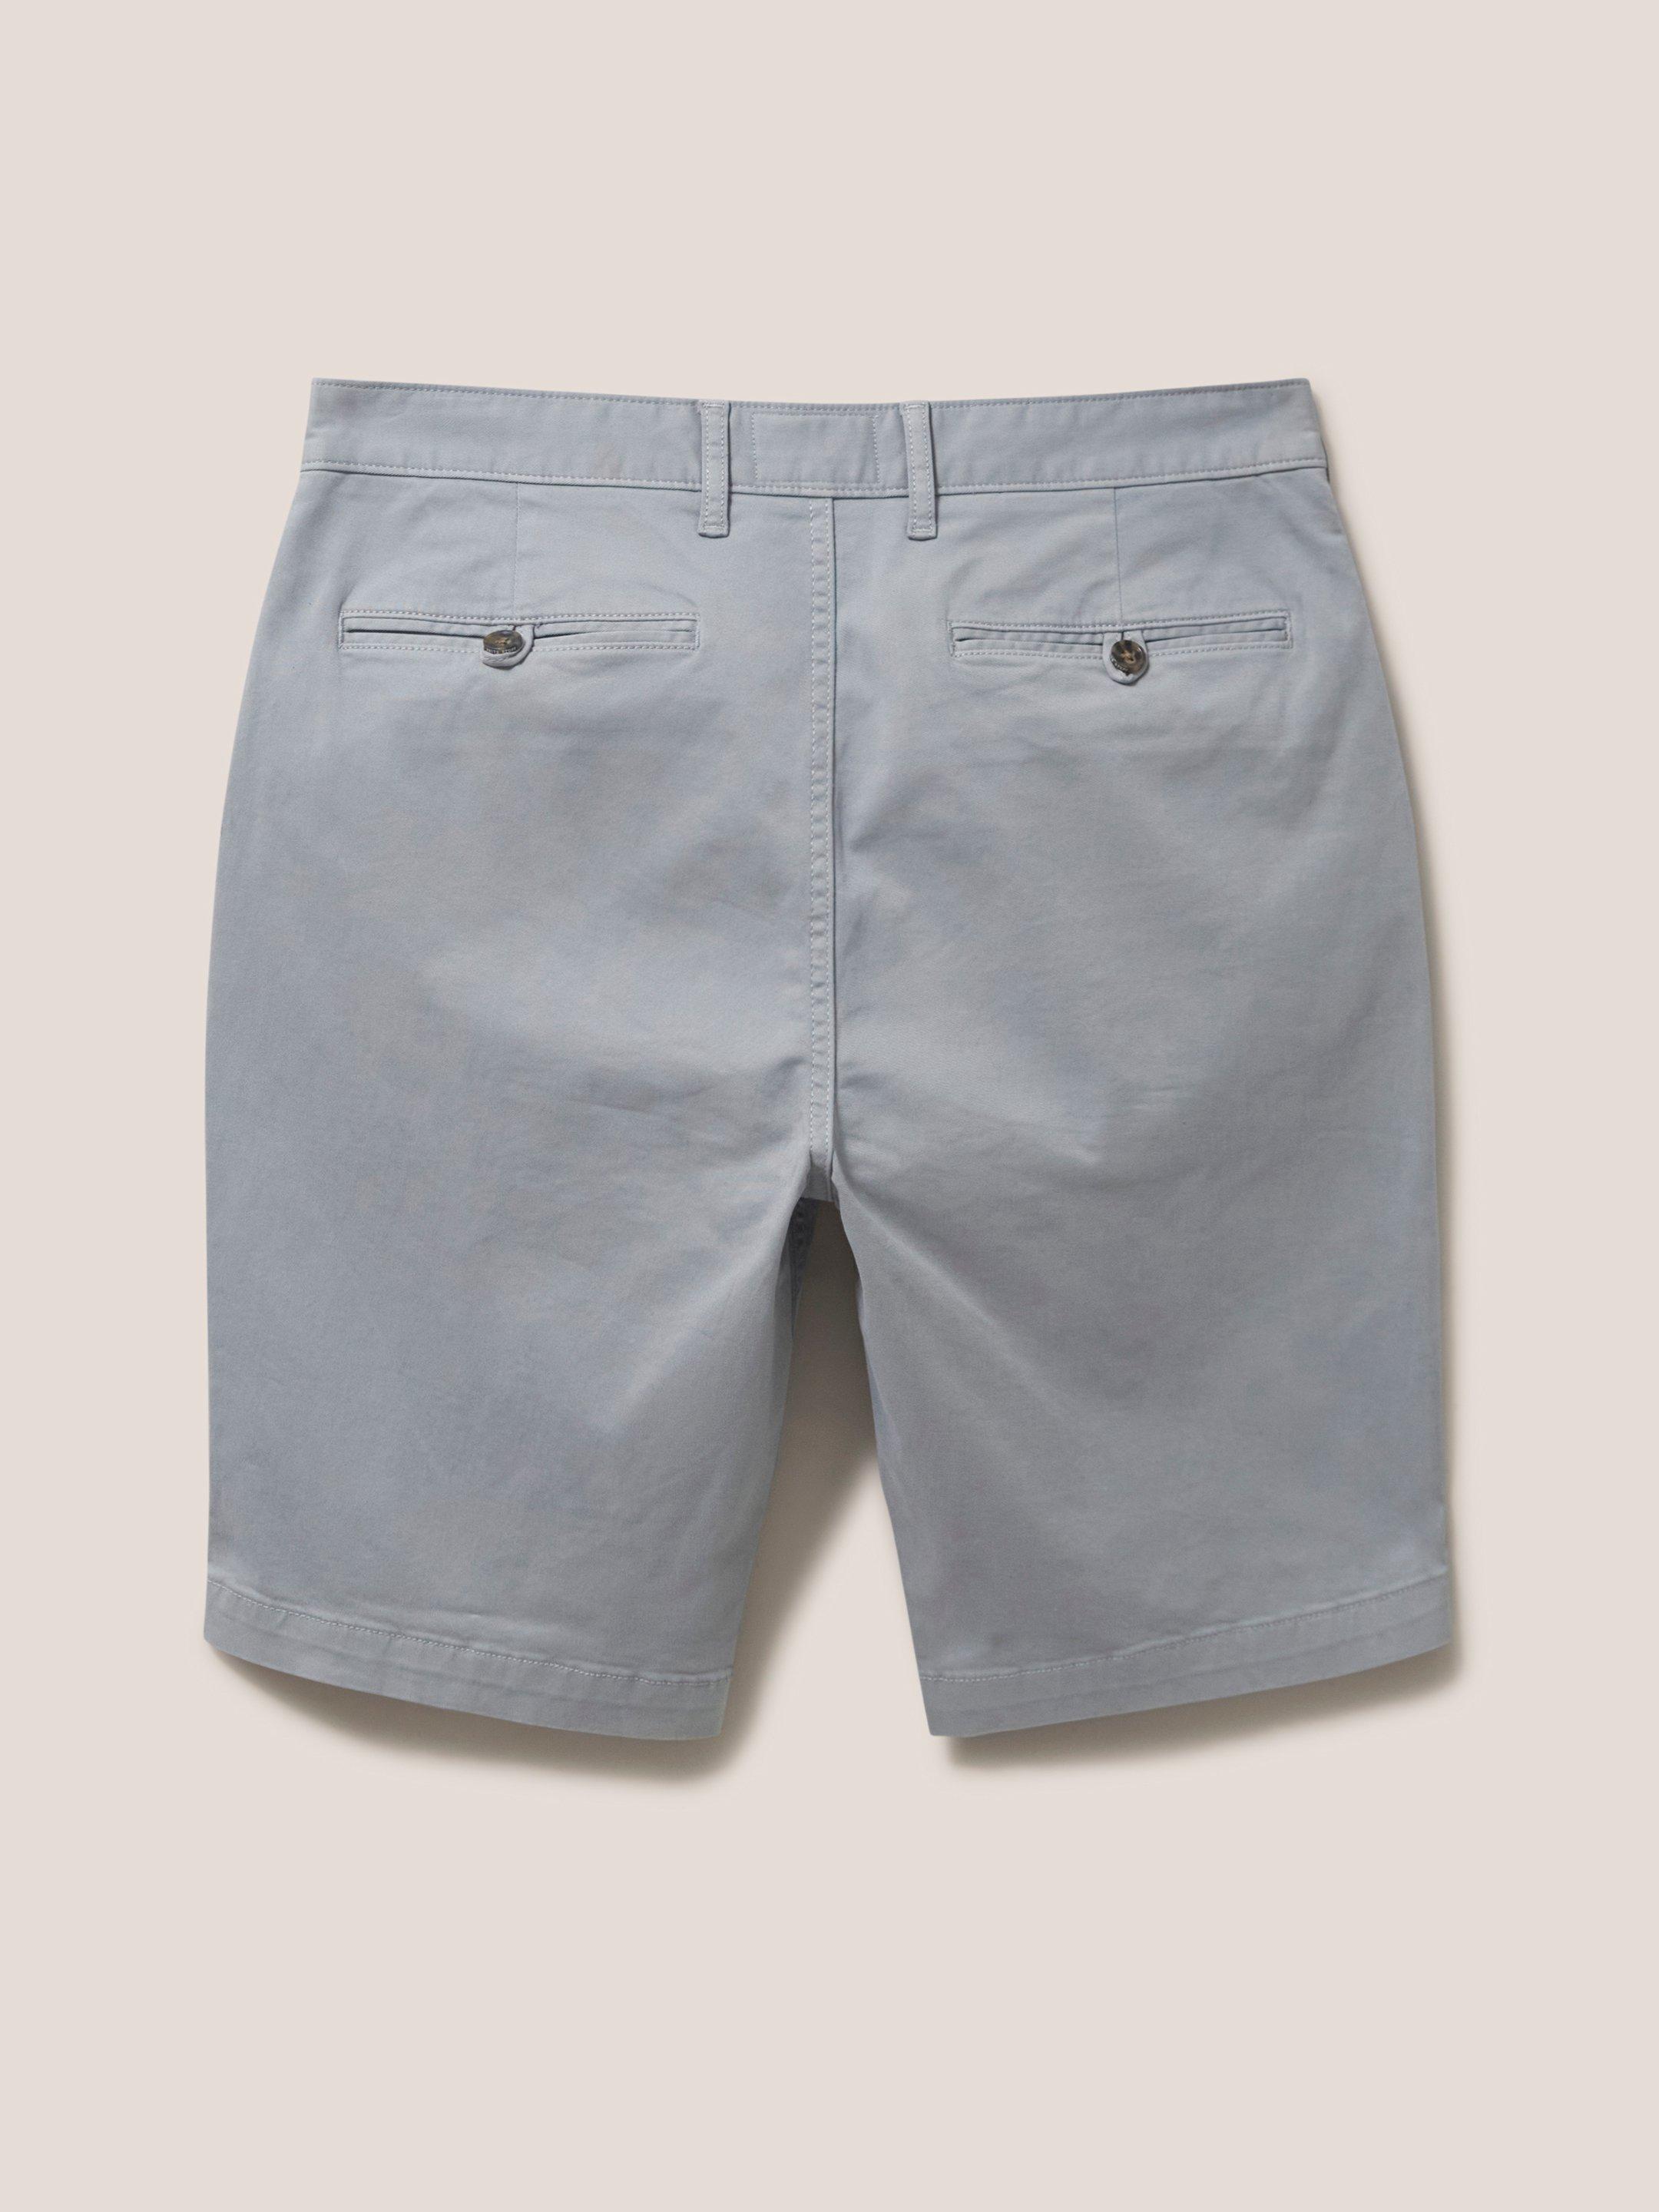 Sutton Slim Fit Chino Short in LGT GREY - FLAT BACK